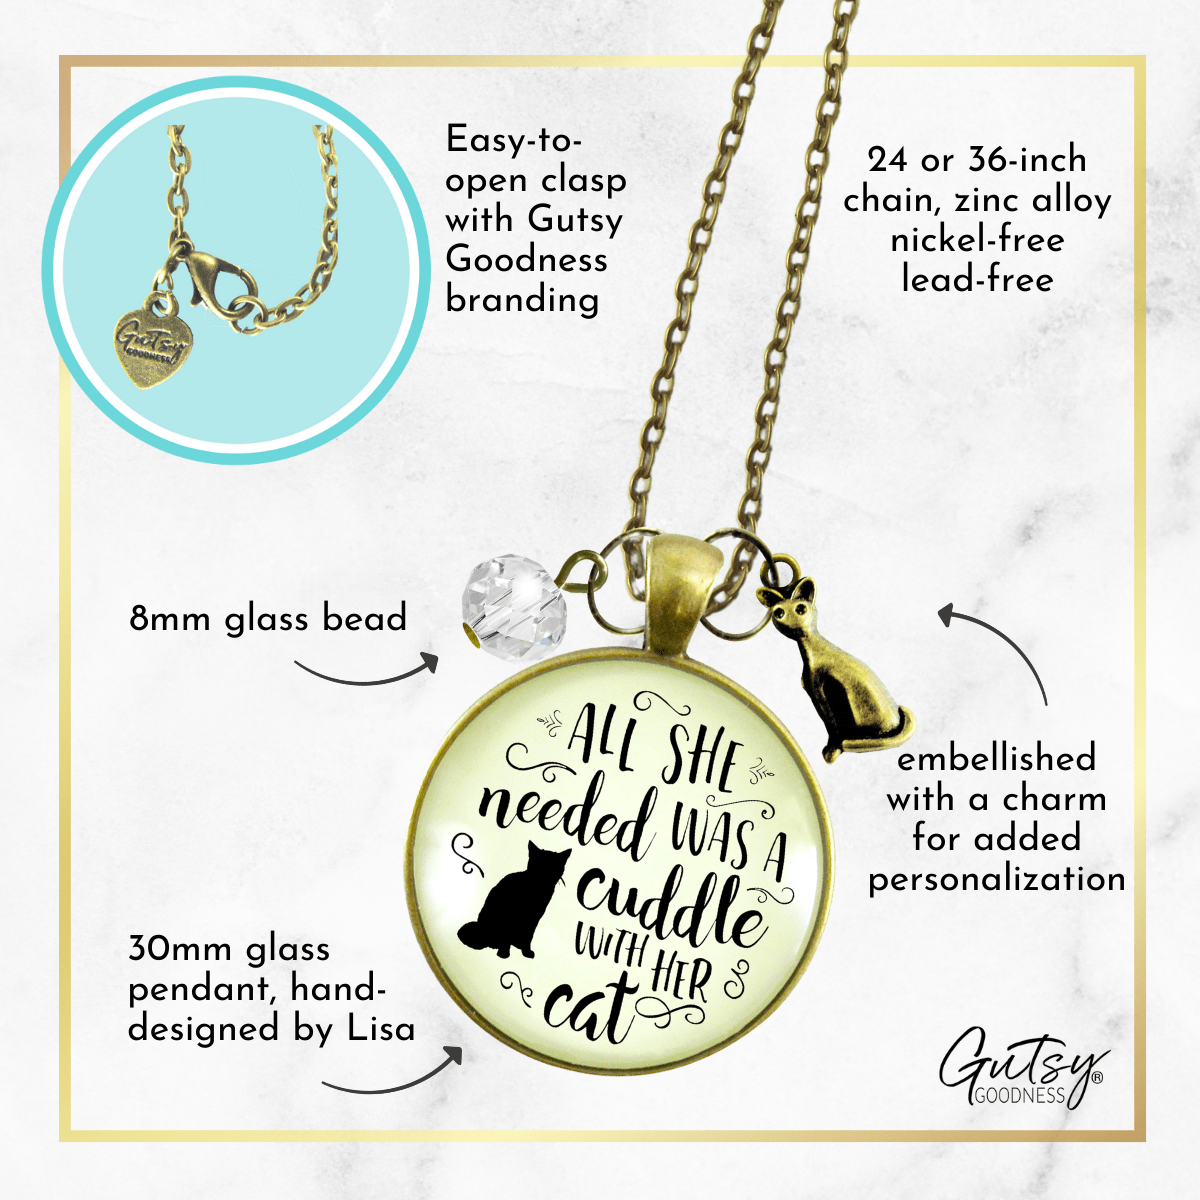 Gutsy Goodness Cat Necklace All She Needed Was Cuddle Gift Quote Kitty Lover Related Cat Jewelry - Gutsy Goodness Handmade Jewelry;All She Needed Was A Cuddle With Her Cat - Gutsy Goodness Handmade Jewelry Gifts